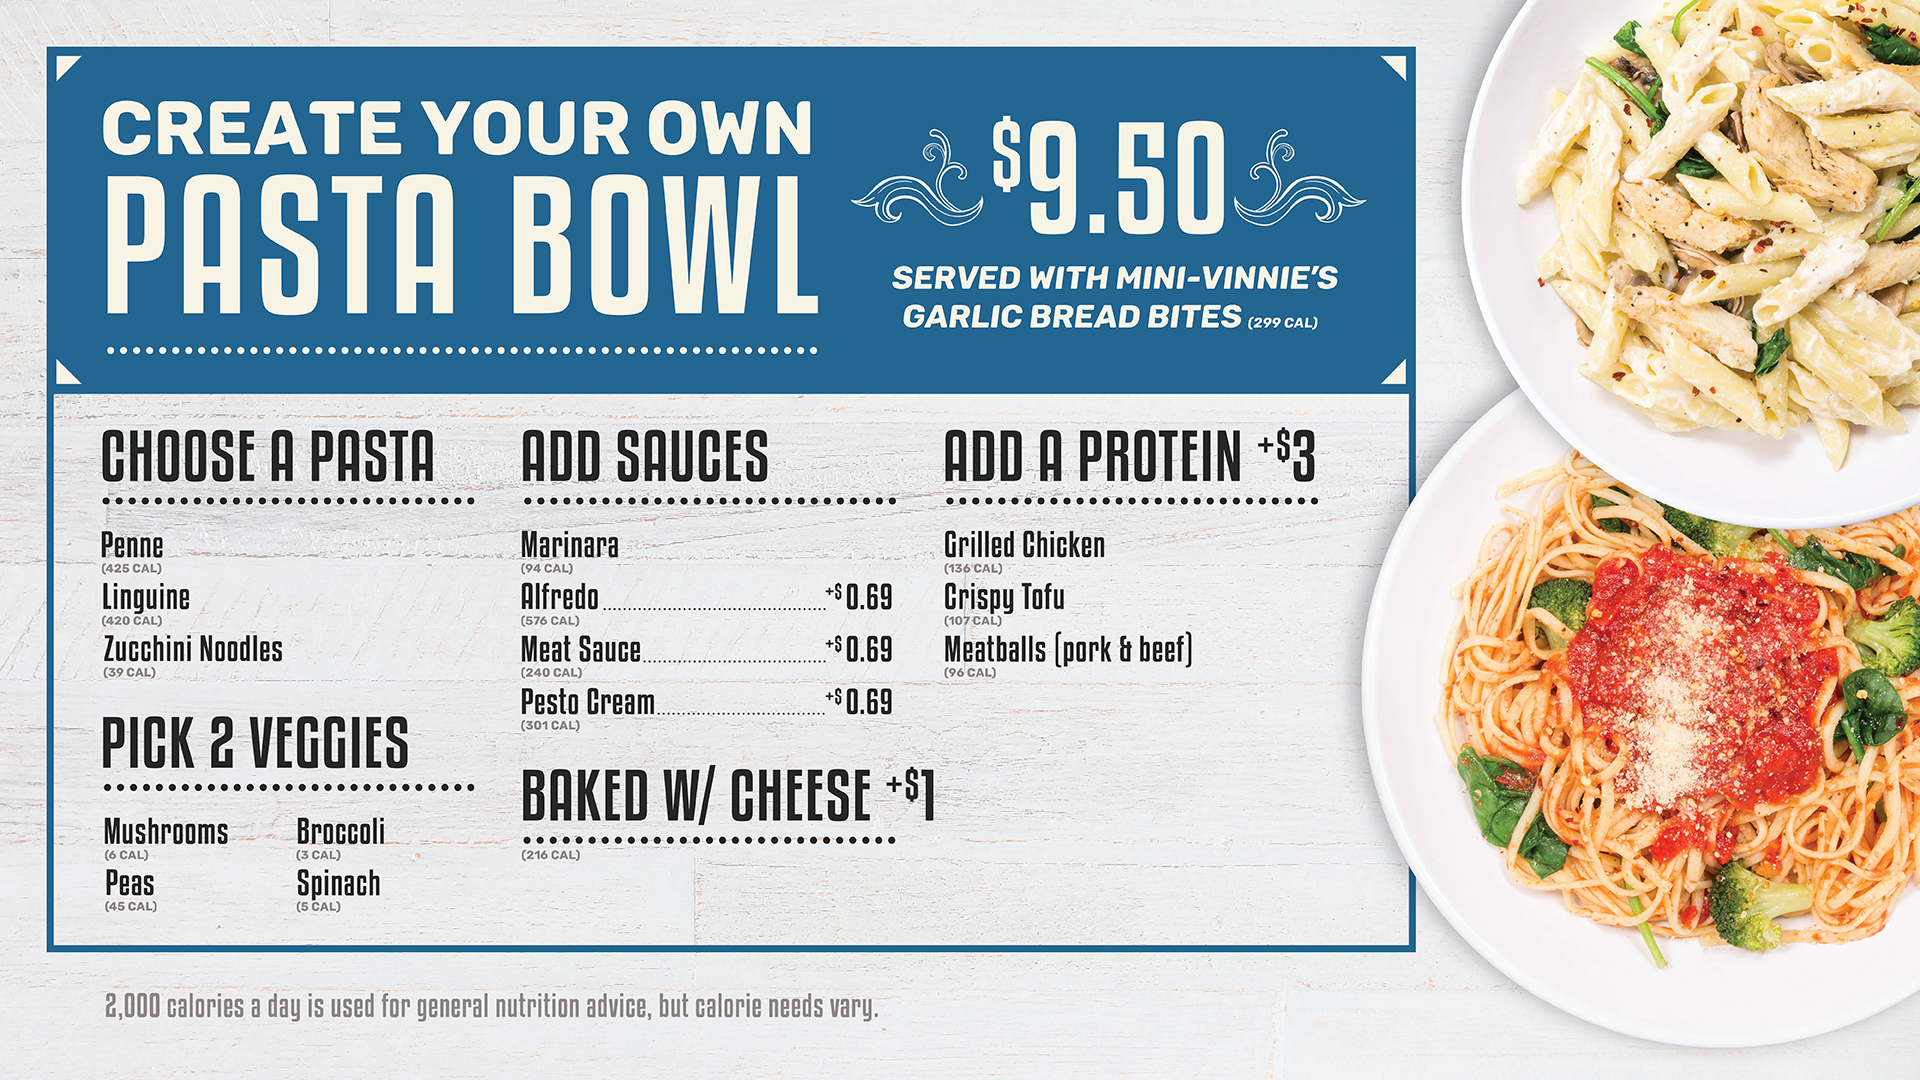 Create your own pasta bowl - $9.50.